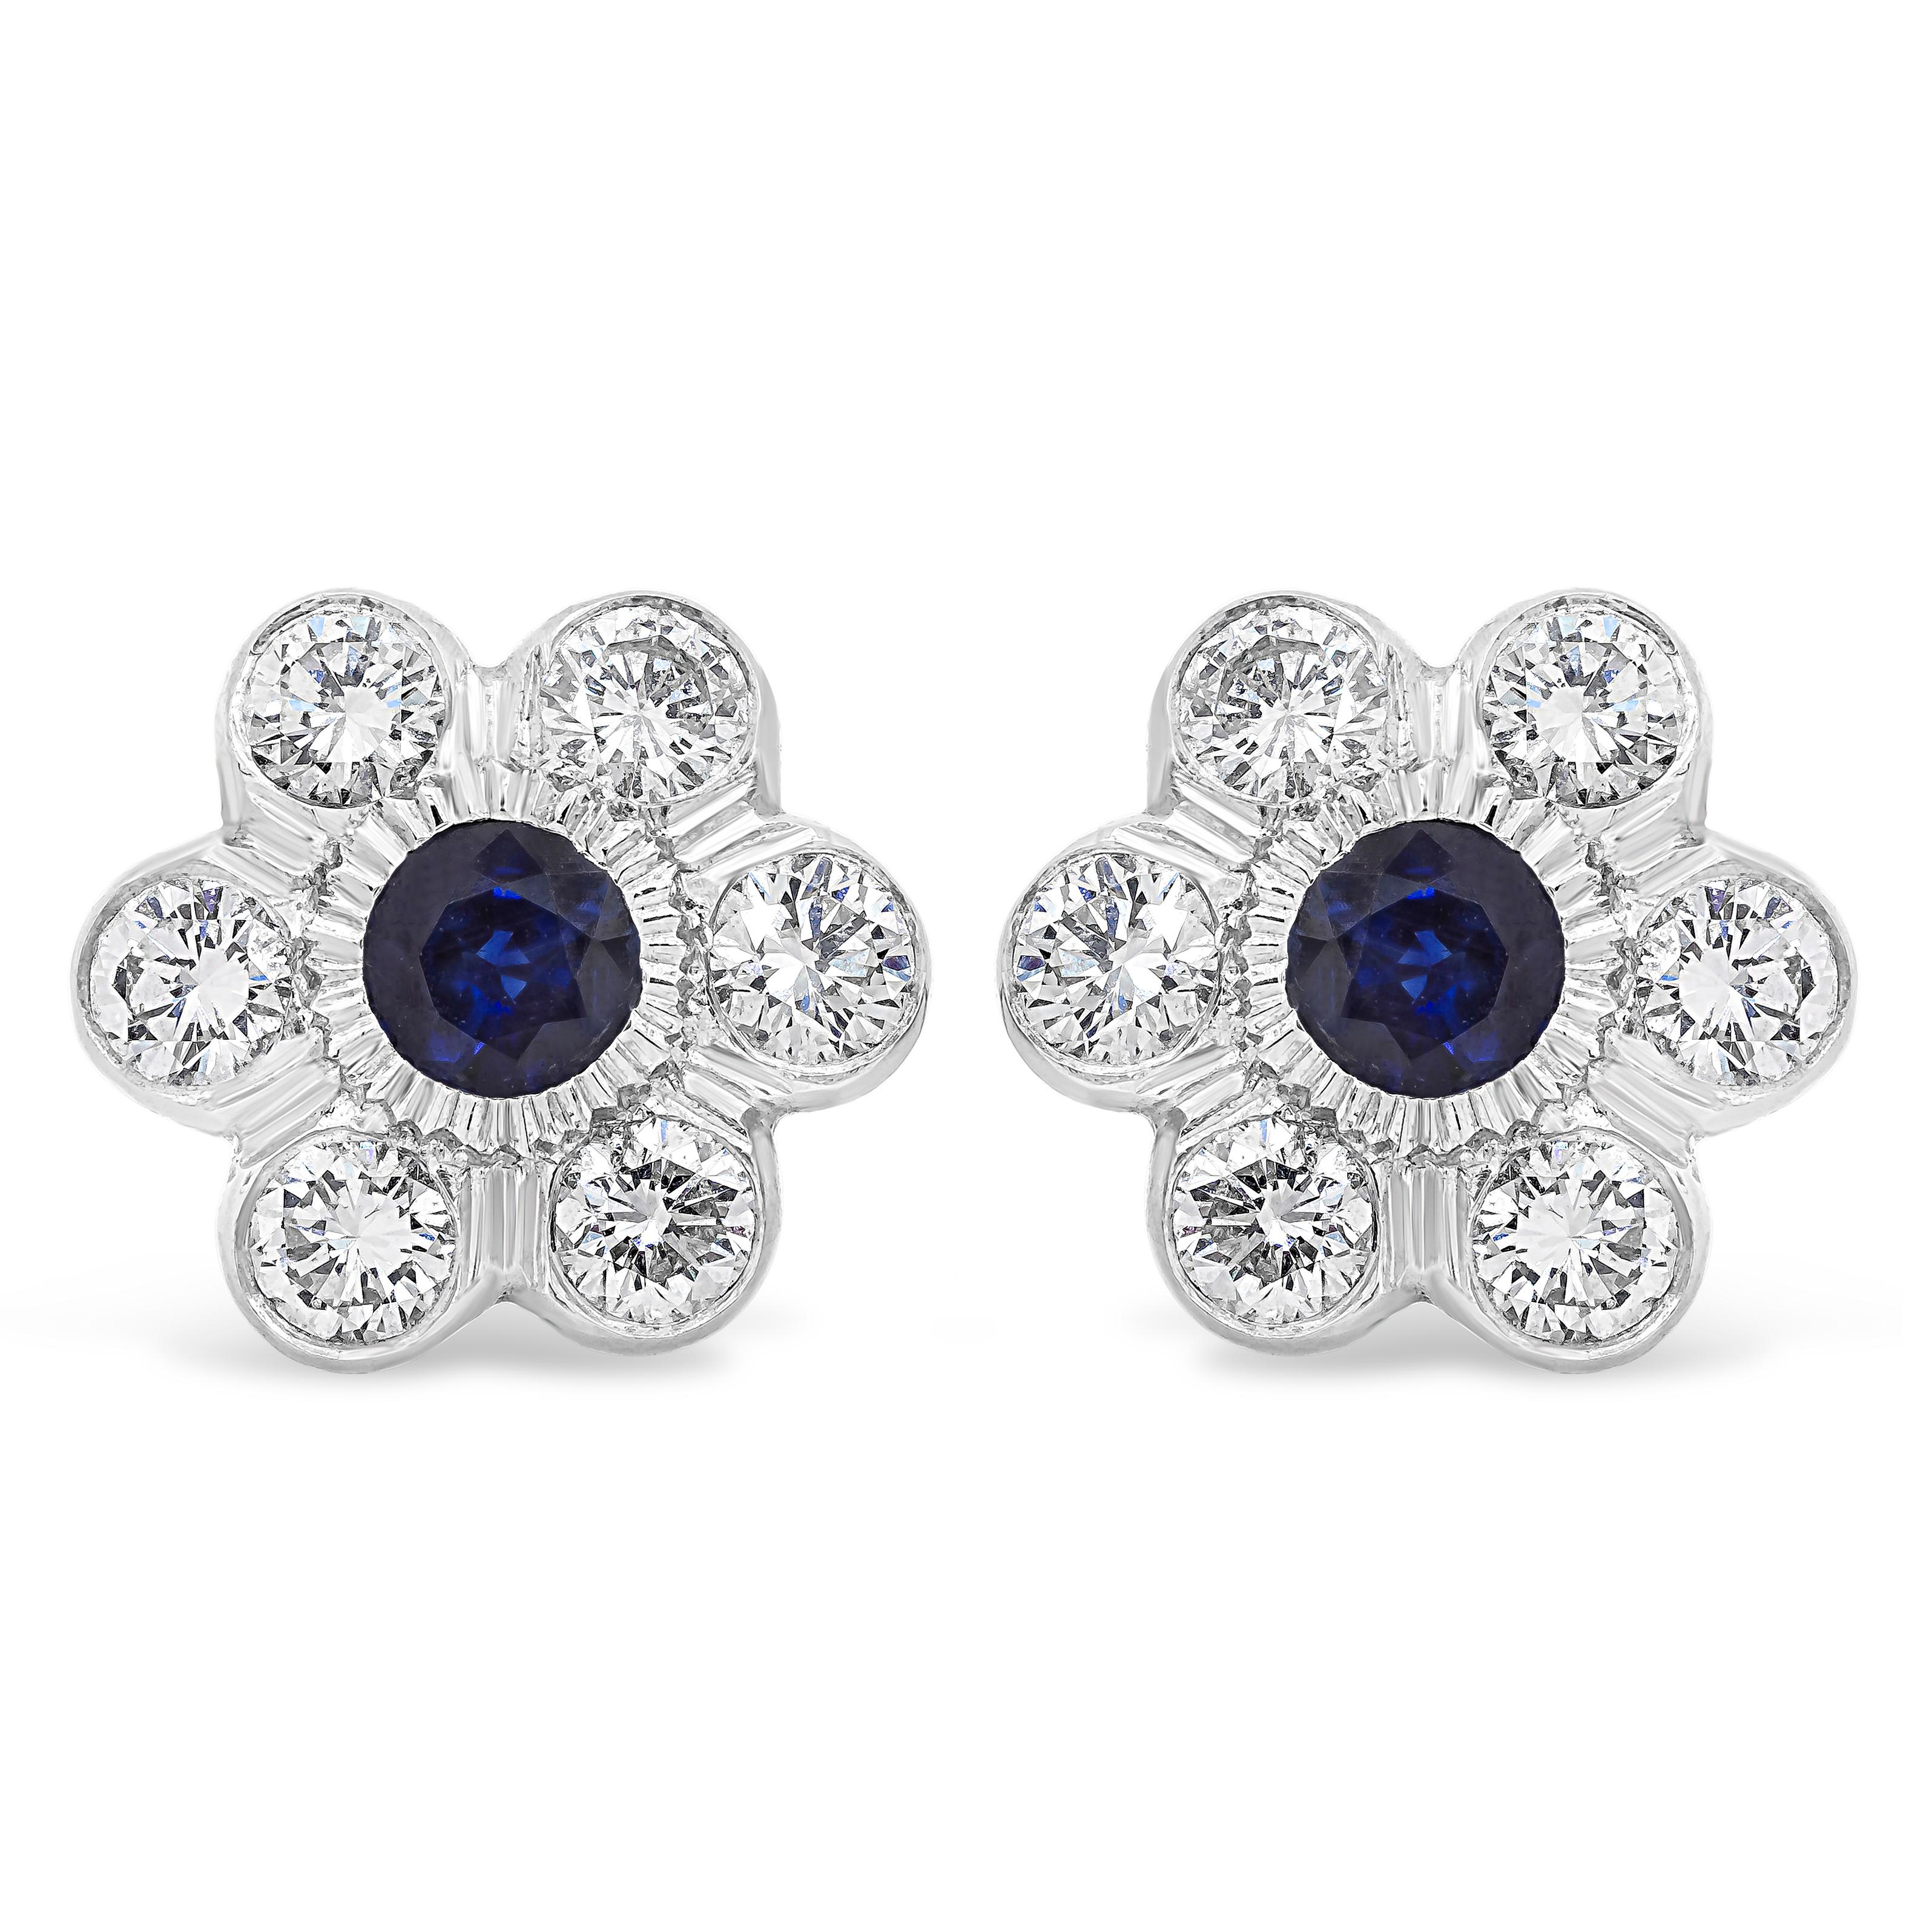 A chic and unique stud earrings showcasing 2 brilliant round blue sapphires weighing 1.33 carats total in the center, set in a beautiful flower-motif design. Surrounded by a row of round brilliant diamonds weighing 2.47 carats total. Finely made in